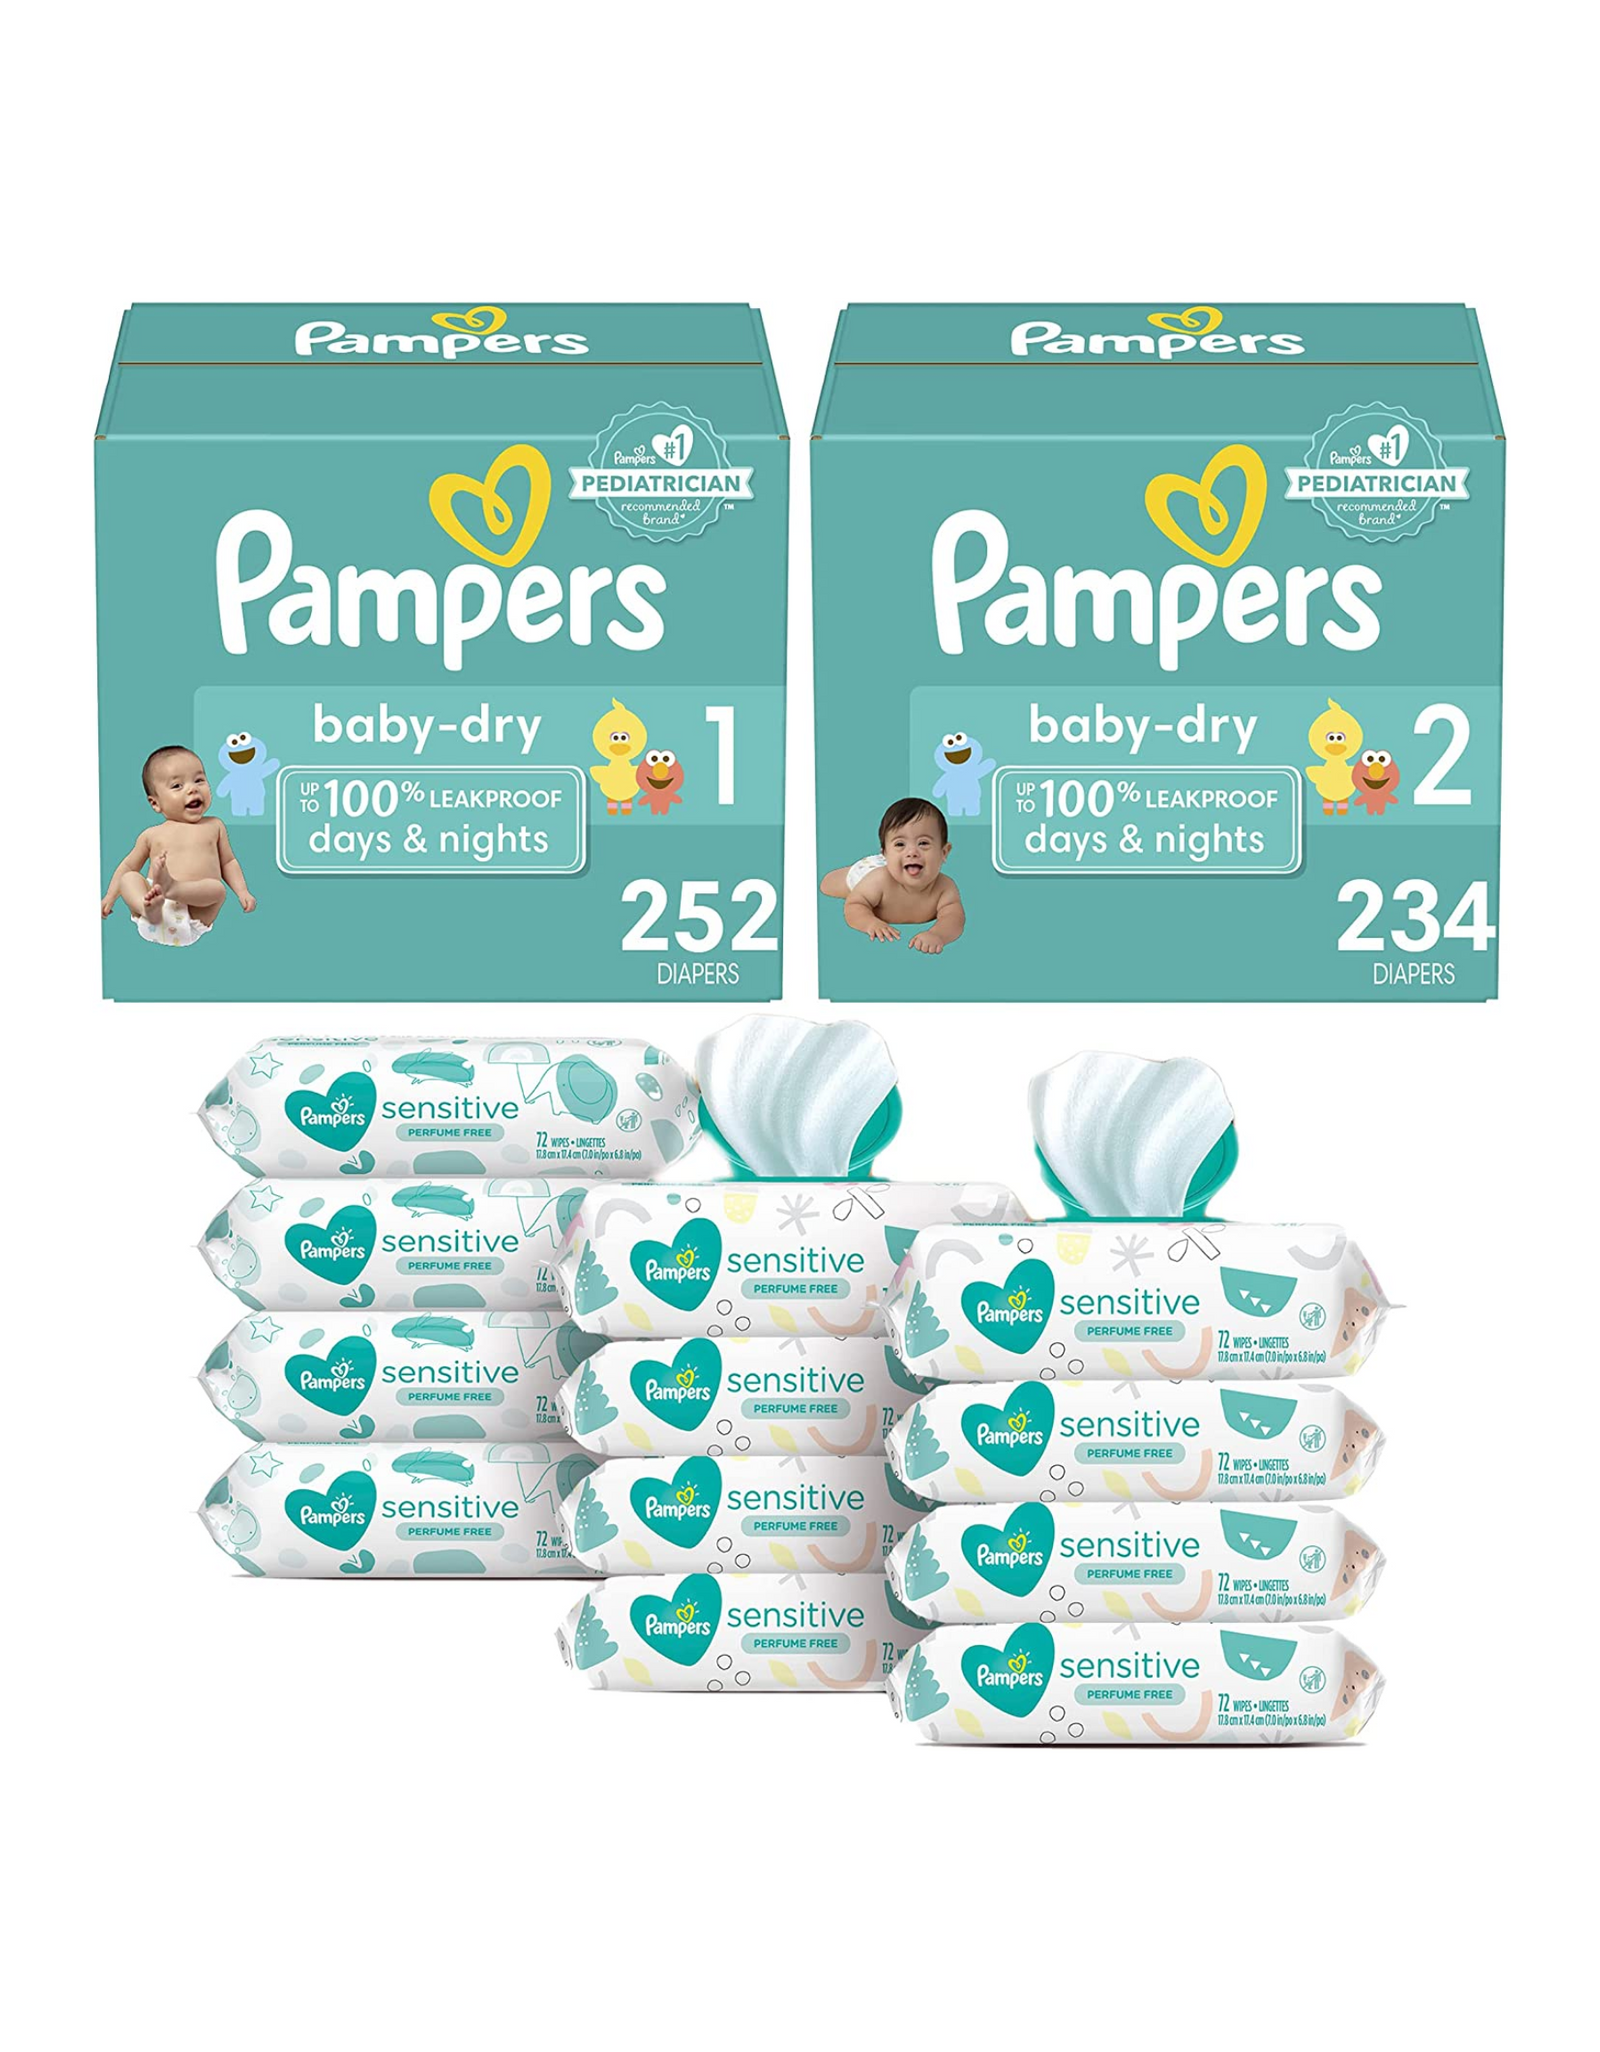 Pampers Baby Dry Disposable Baby Diapers, Sizes 1, 252 Ct & Size 2, 234 Ct with Sensitive Water Based Baby Wipes, 8 Pop-Top Packs + 4 Refills, 864 total wipes (12 Packs)